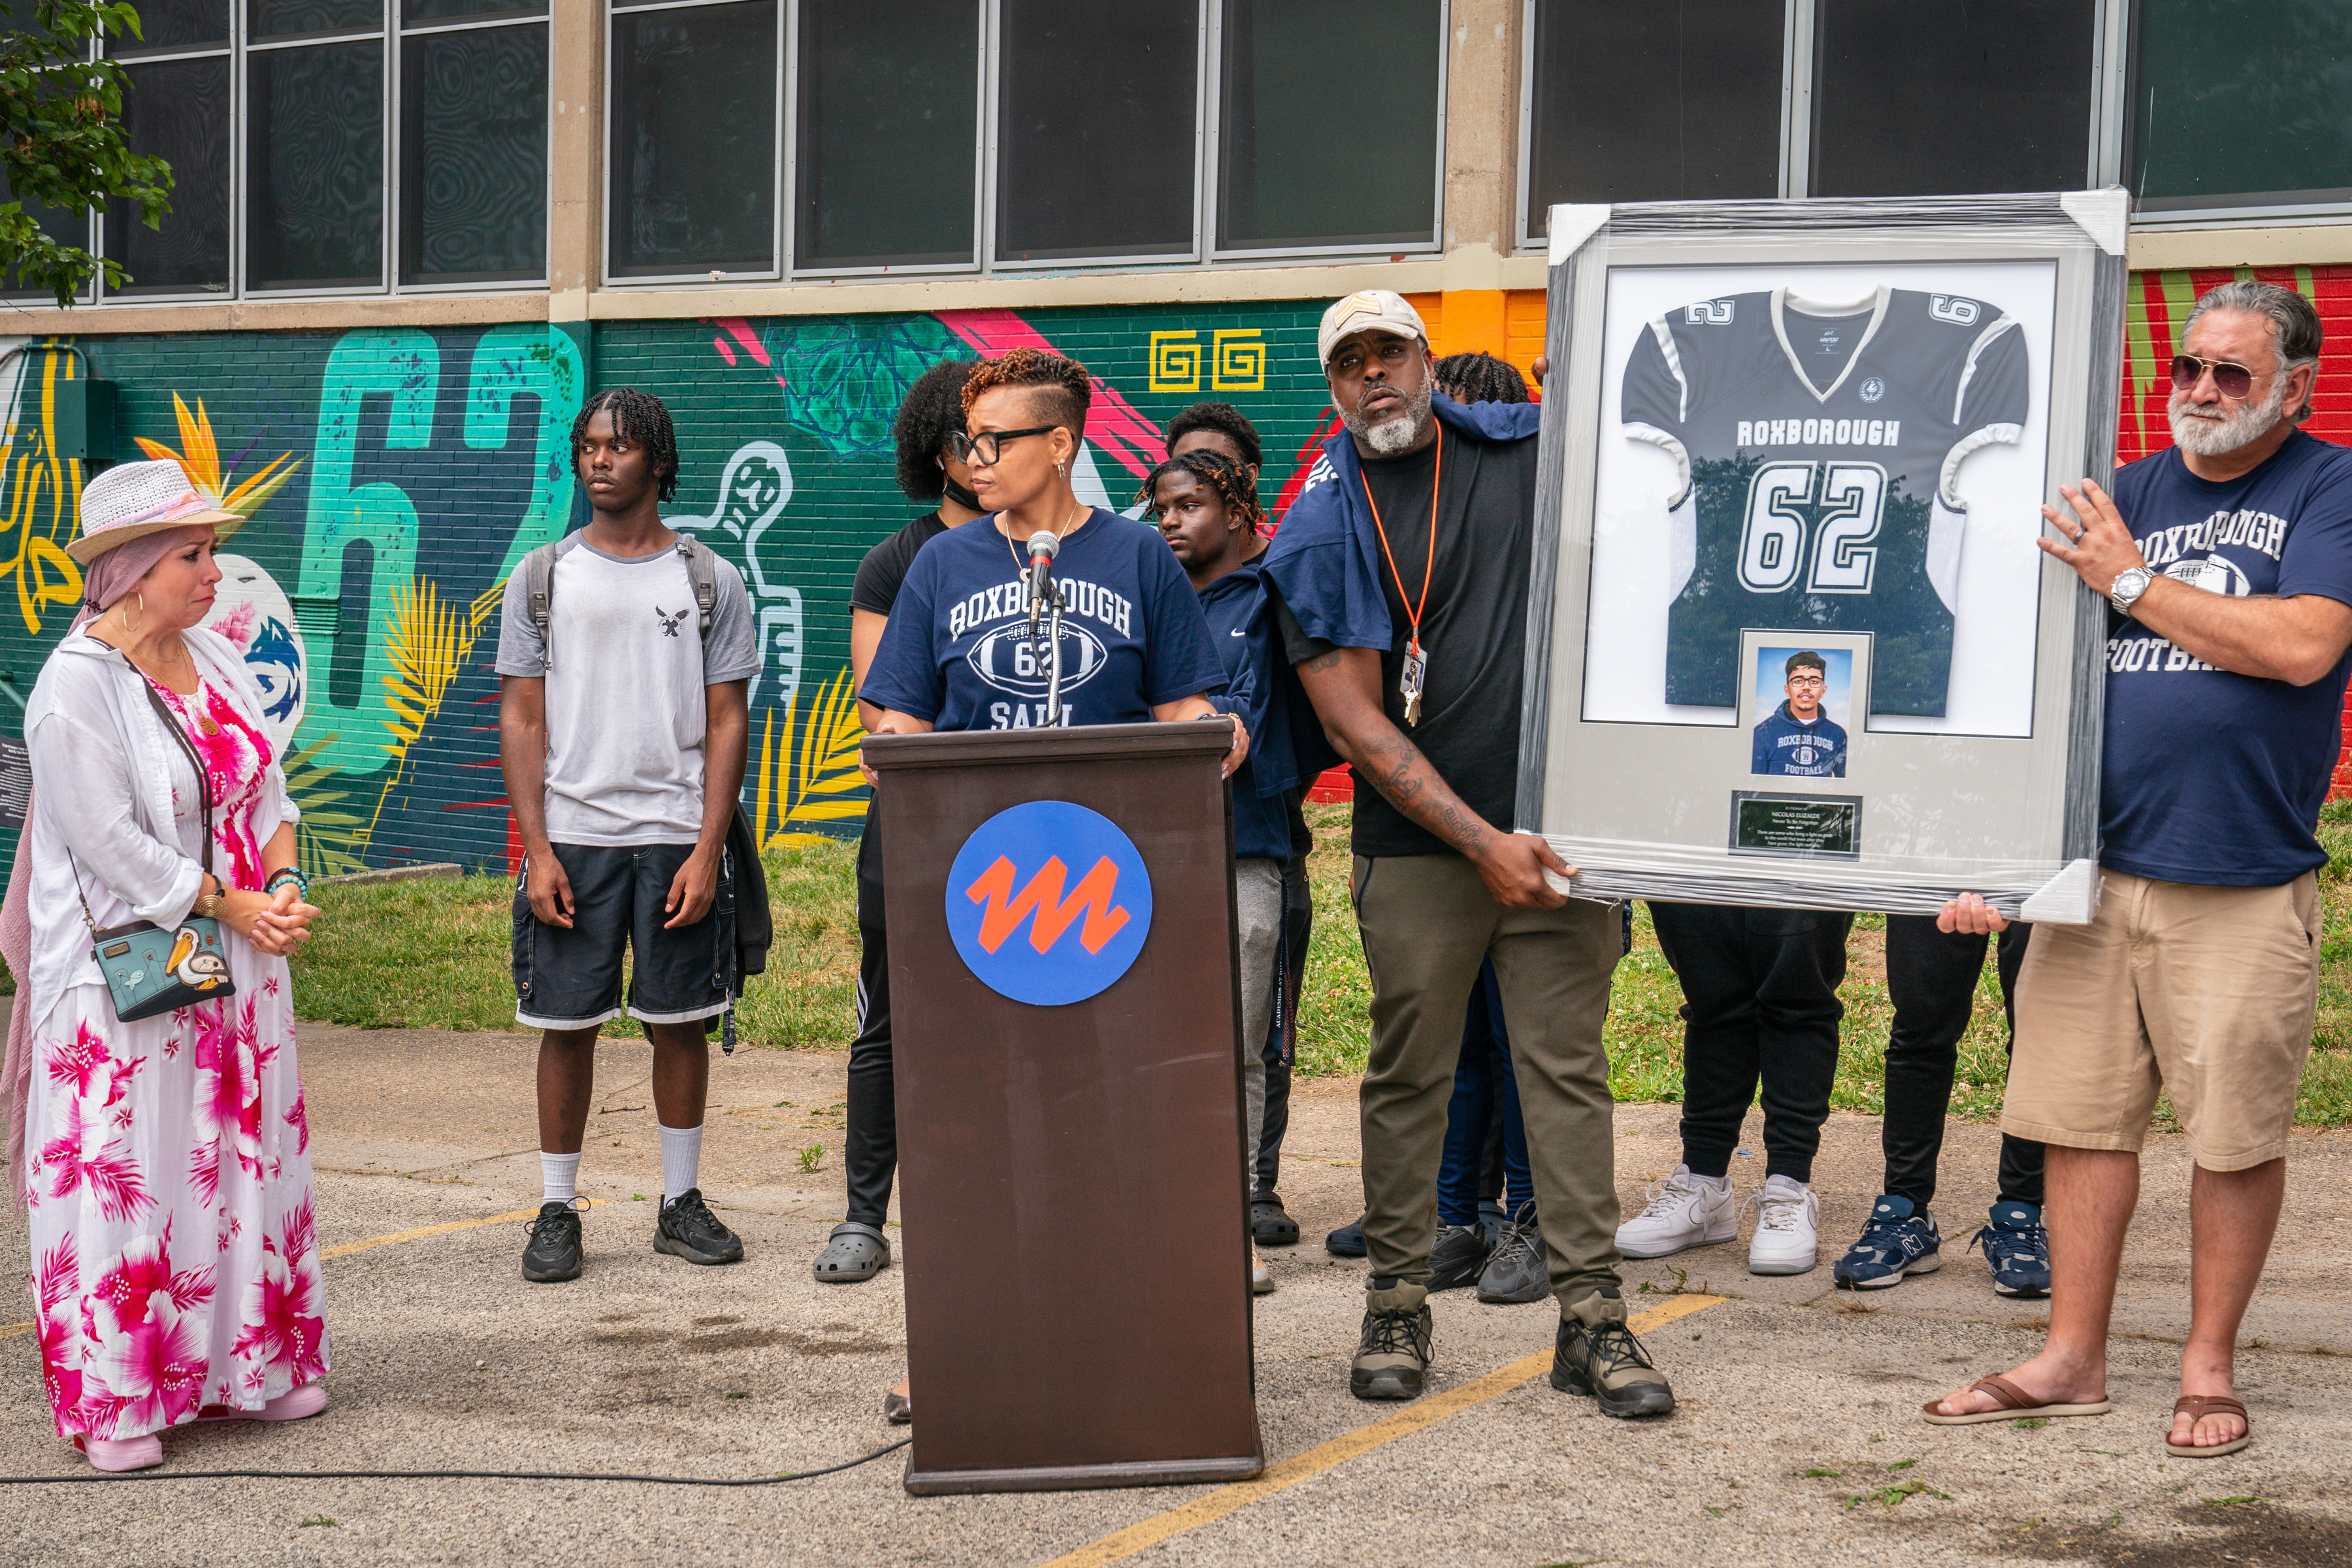 Shooting deaths of Roxborough, Saul students shaped hard year for Philly students